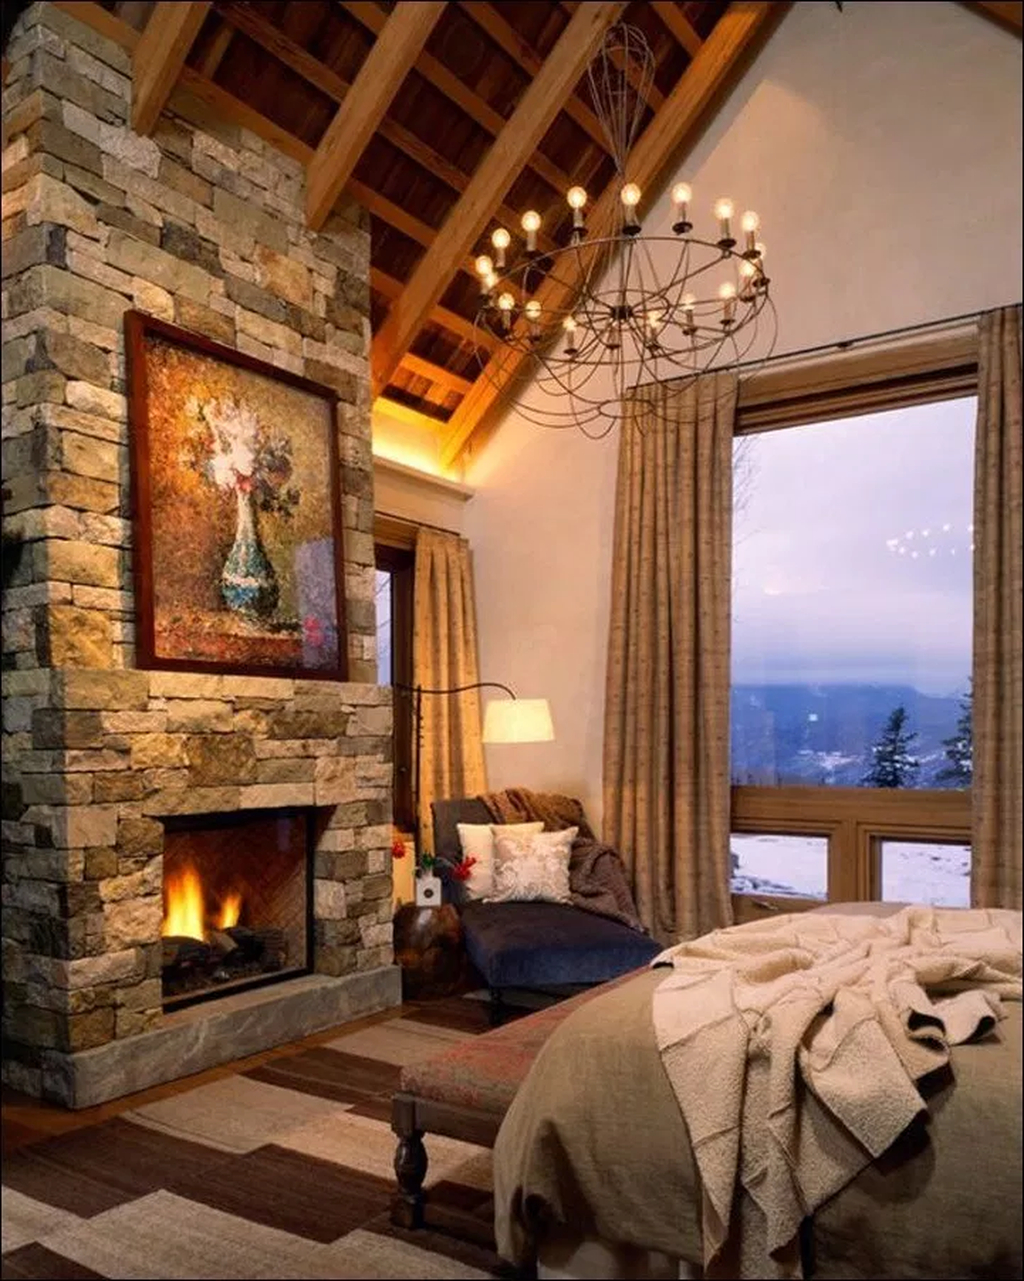 Gorgeous Log Cabin Style Home Interior Design01